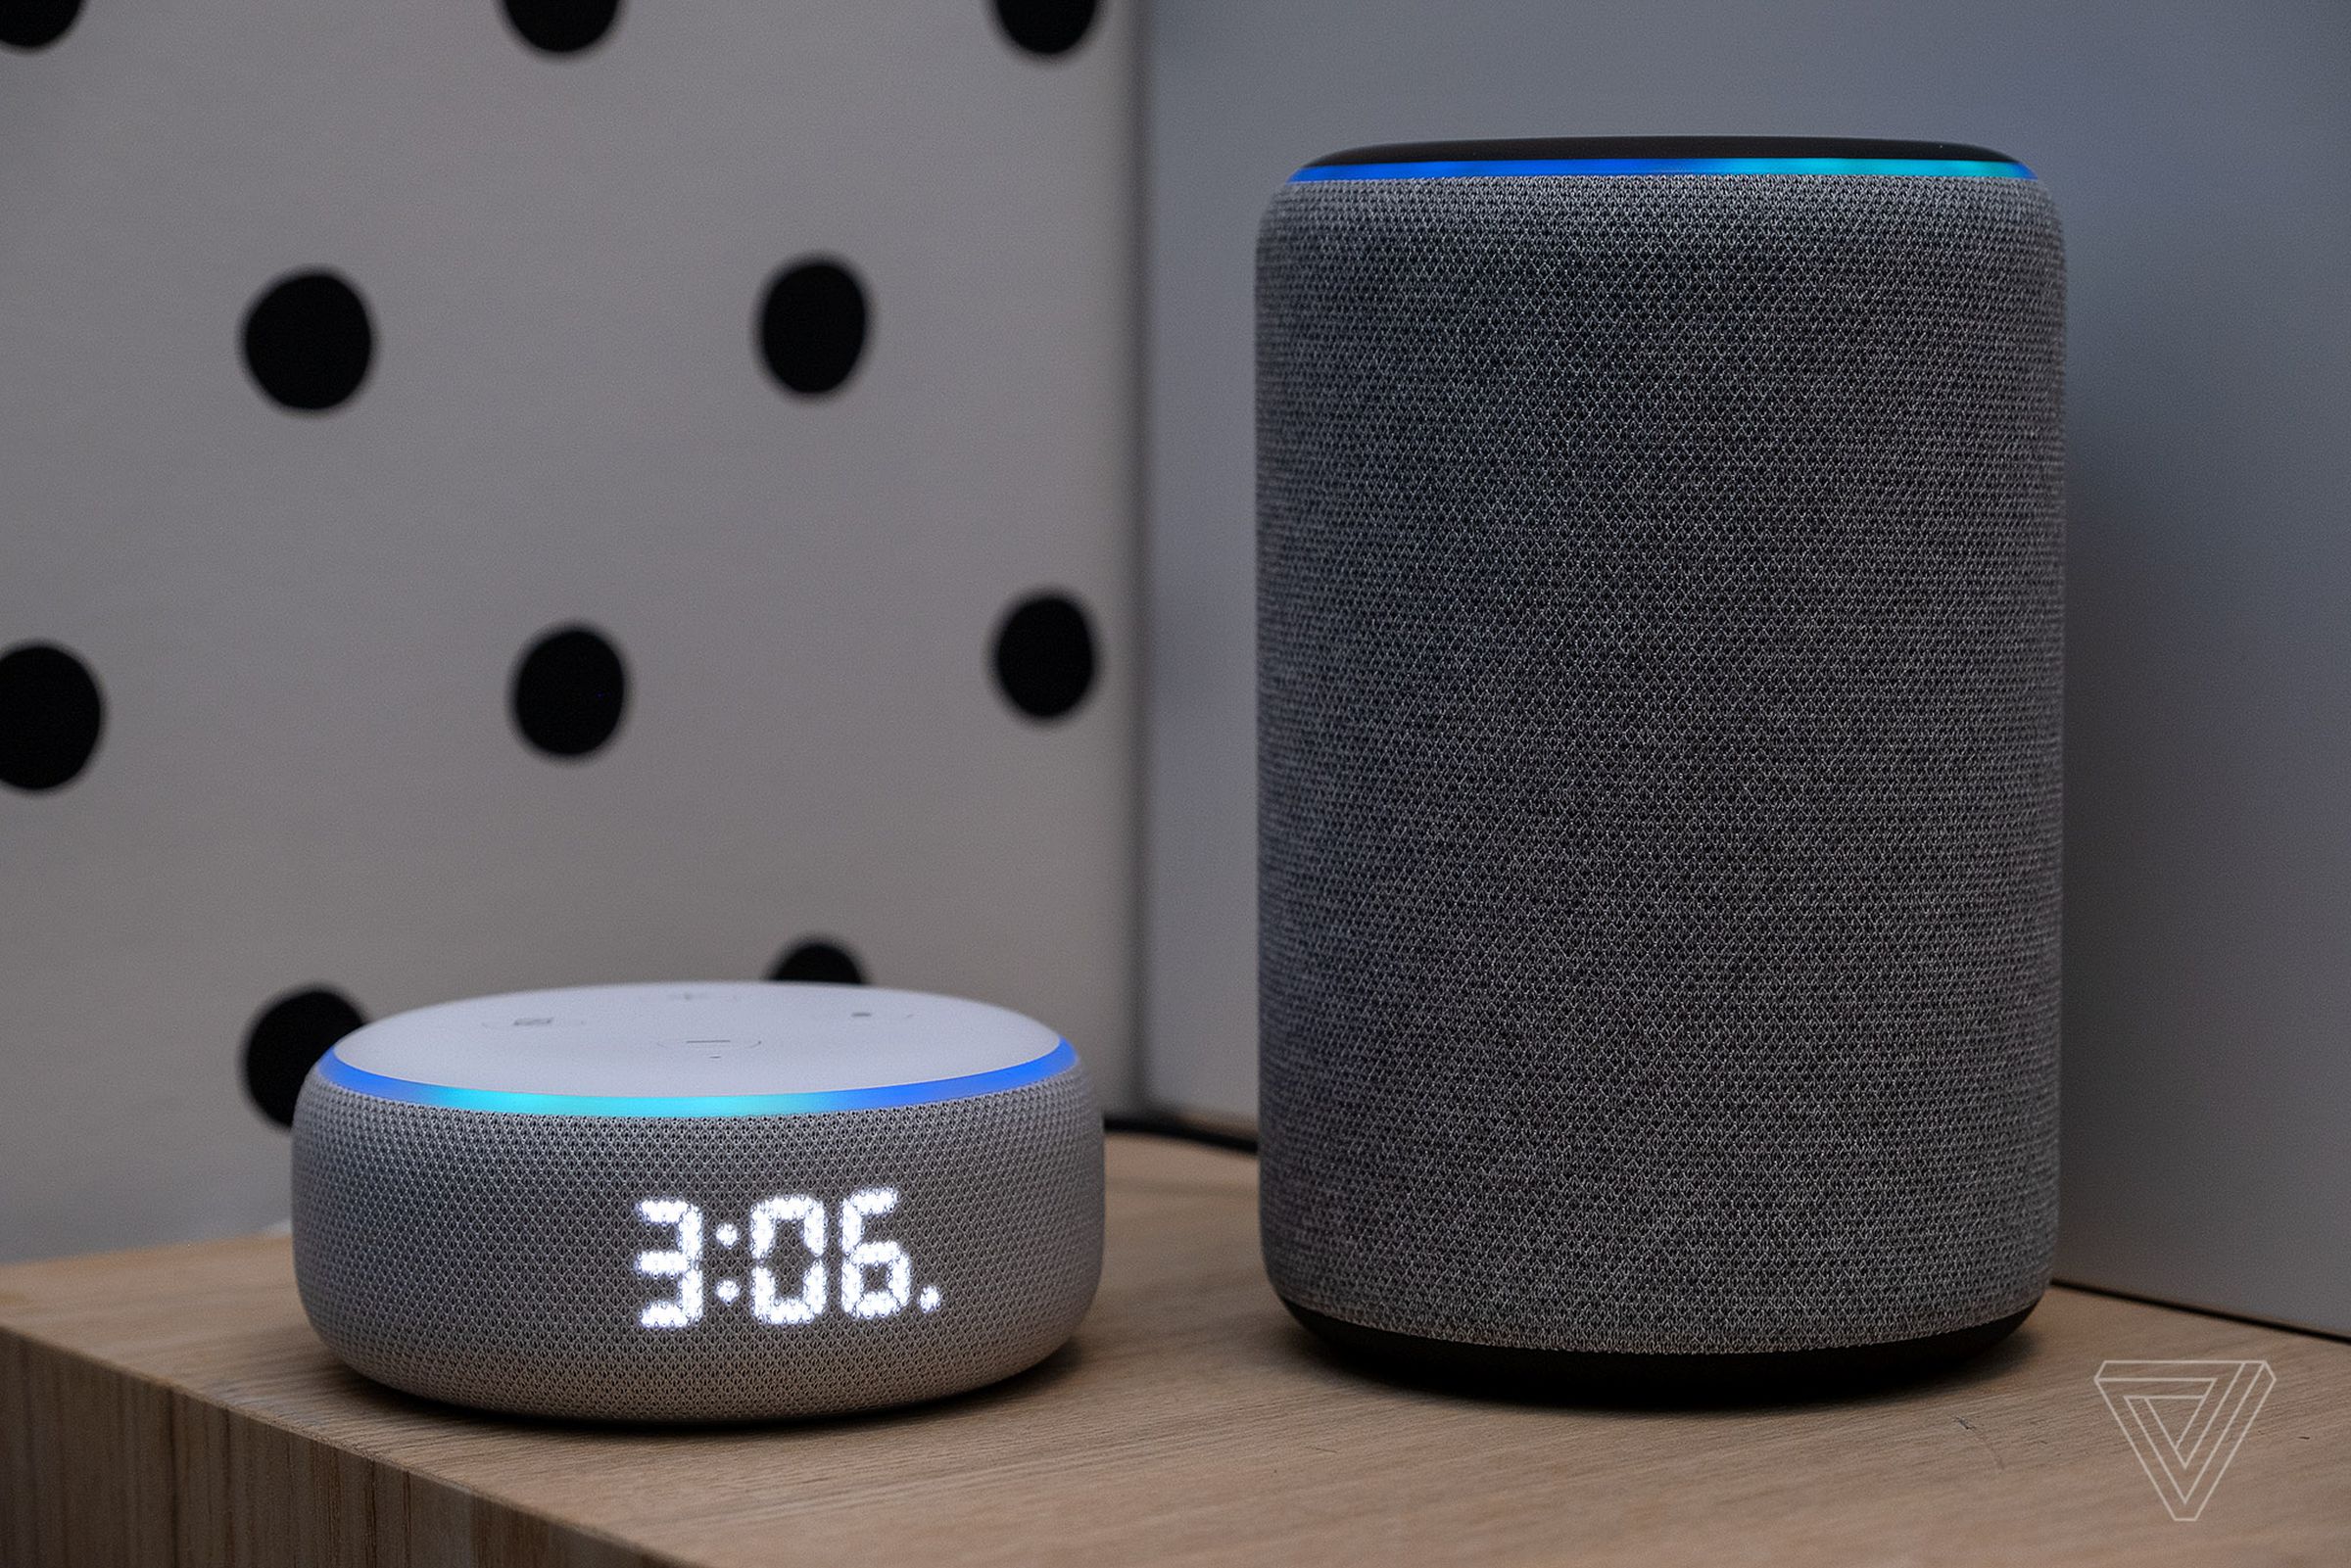 The Echo Dot with clock next to the bigger Echo.